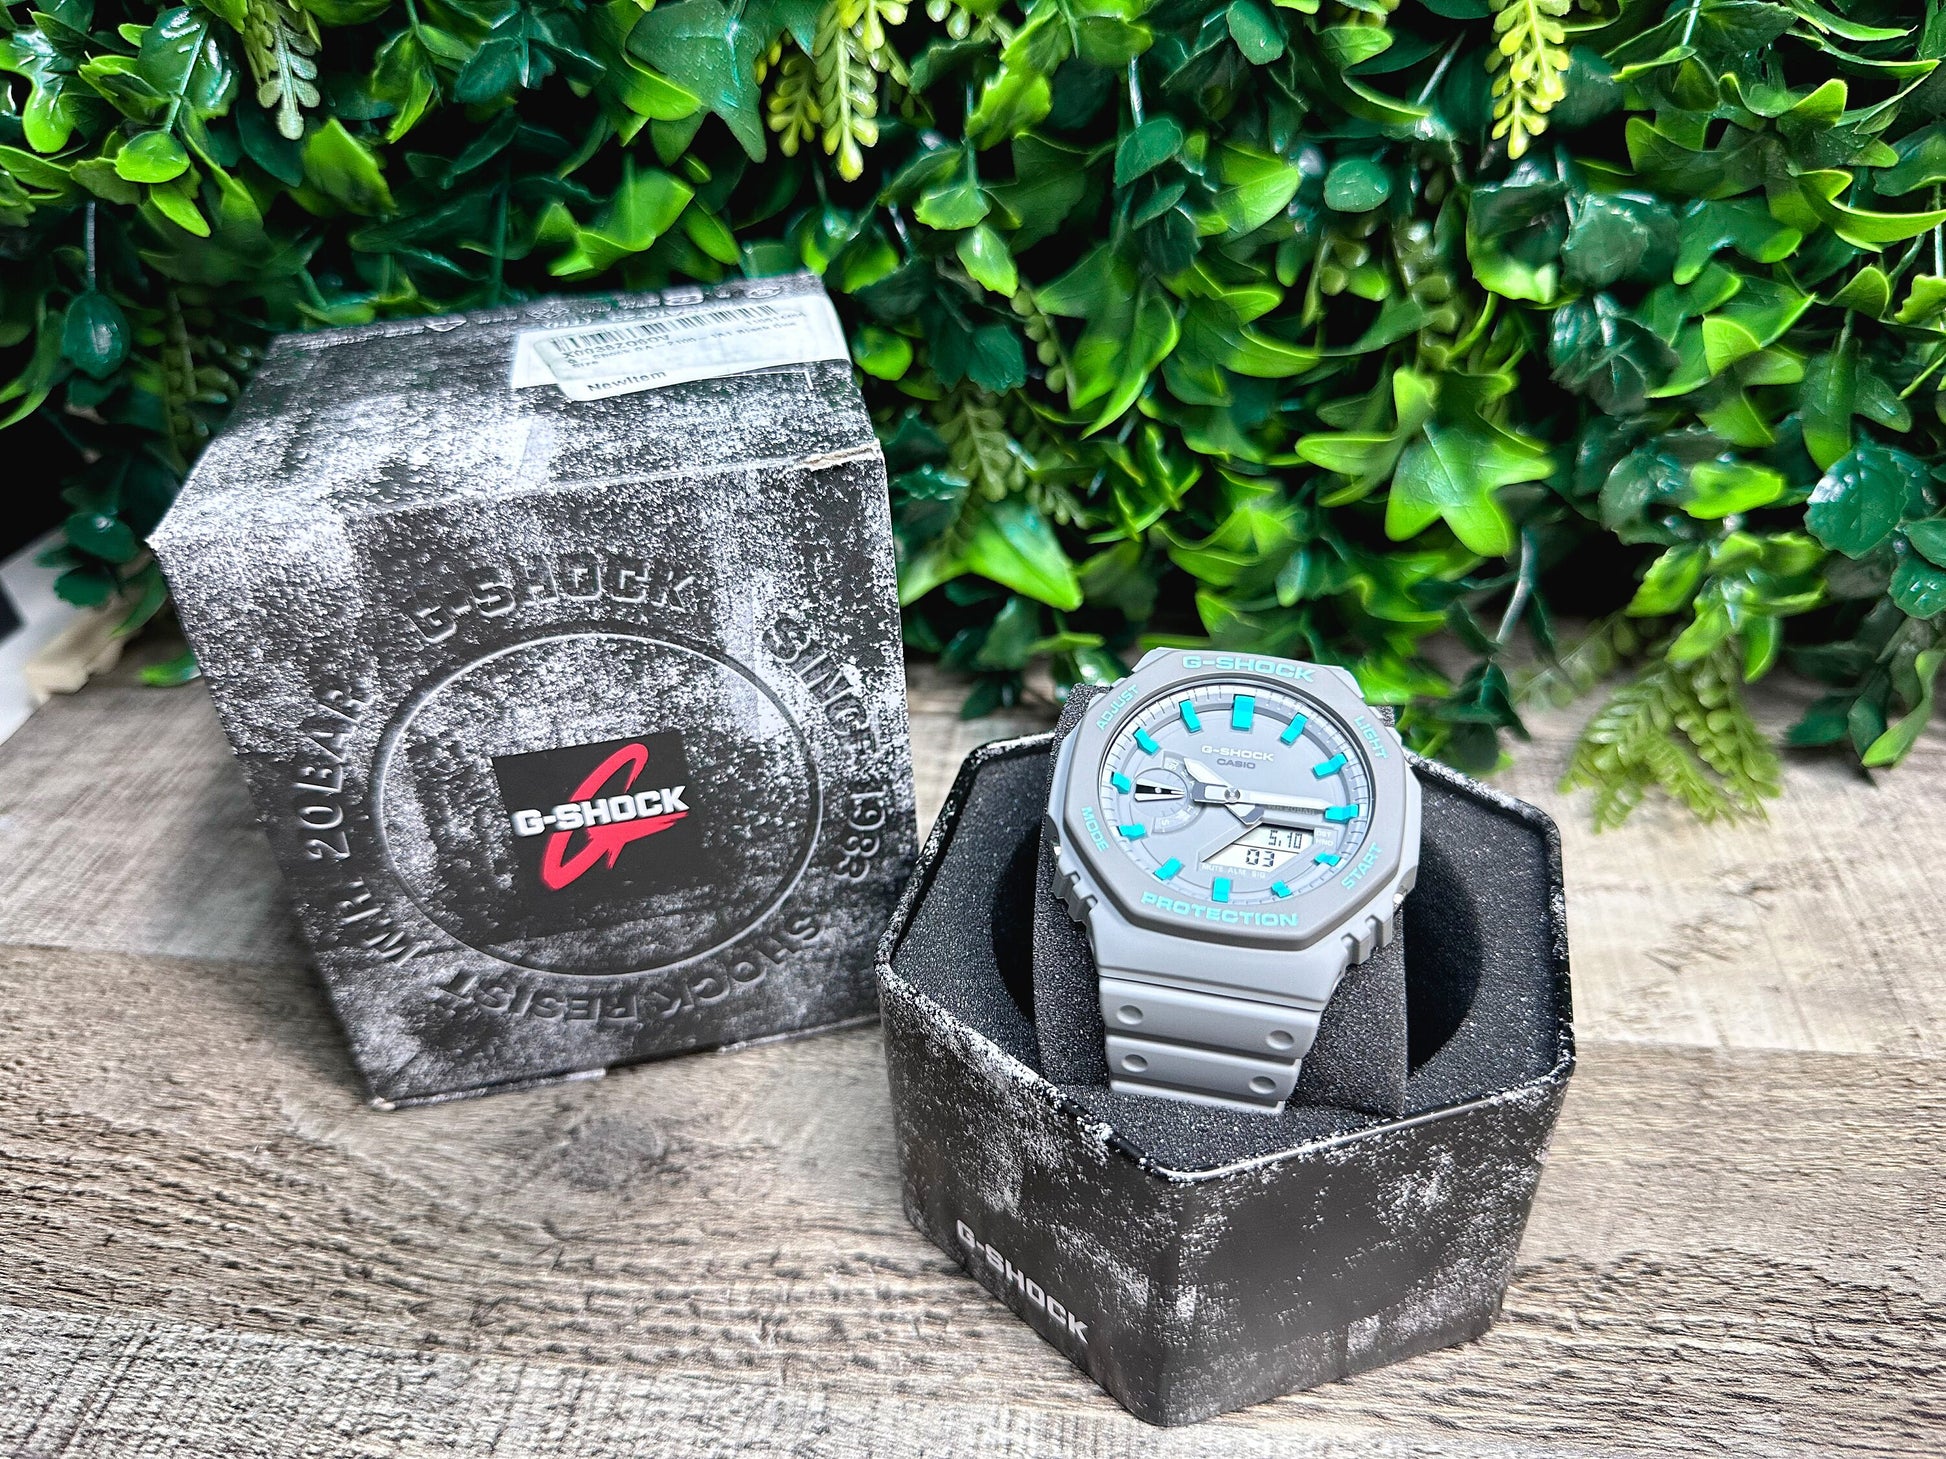 G-Shock CasiOak "Grey Sky" - Grey/Blue Hand Painted Genuine Casio GA2100 - Carbon Core Protection - Optional Sapphire Crystal